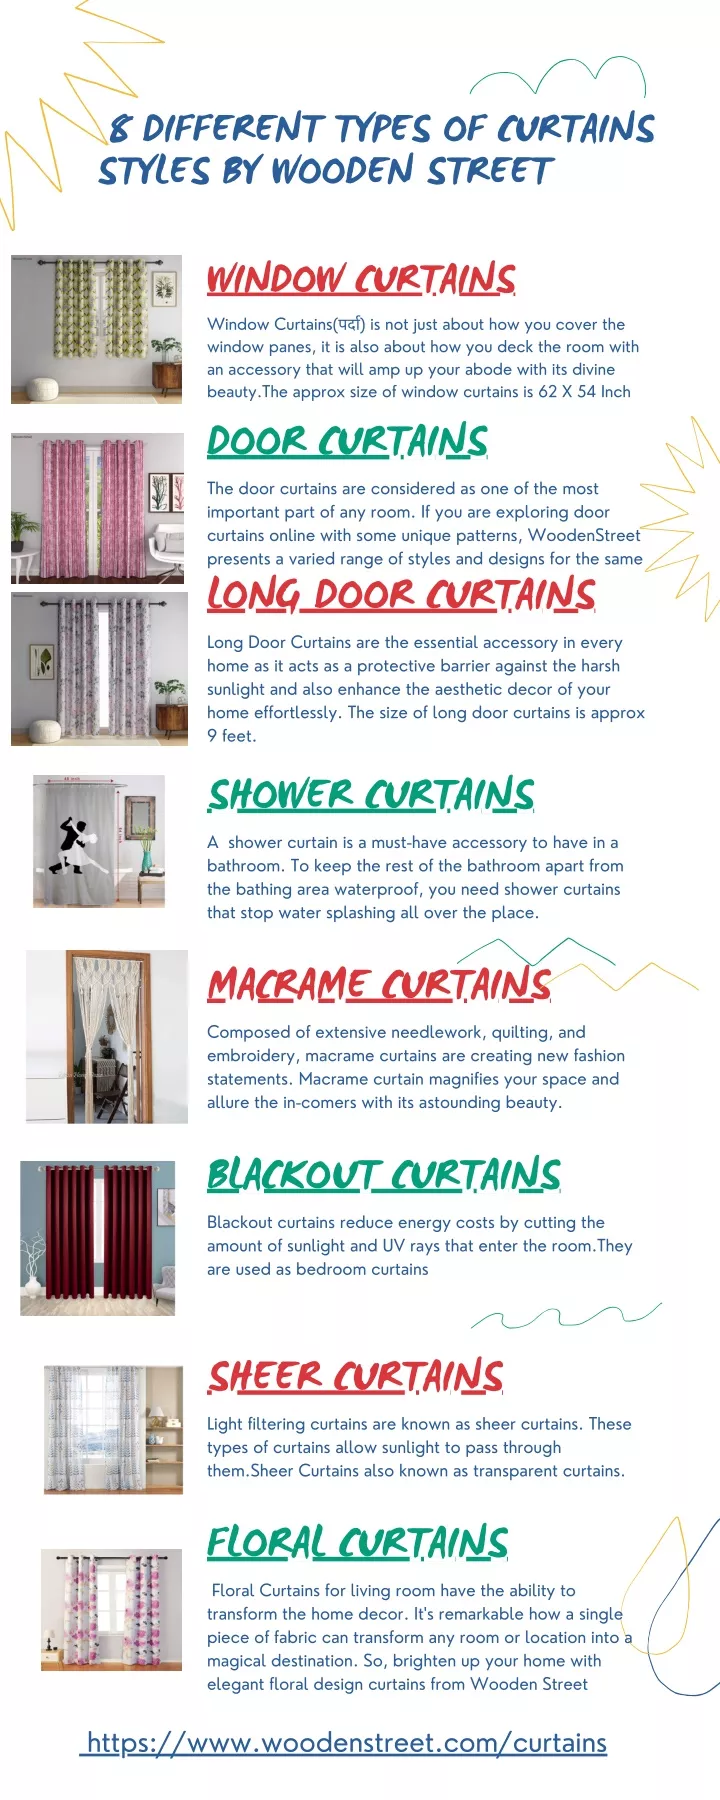 8 different types of curtains styles by wooden